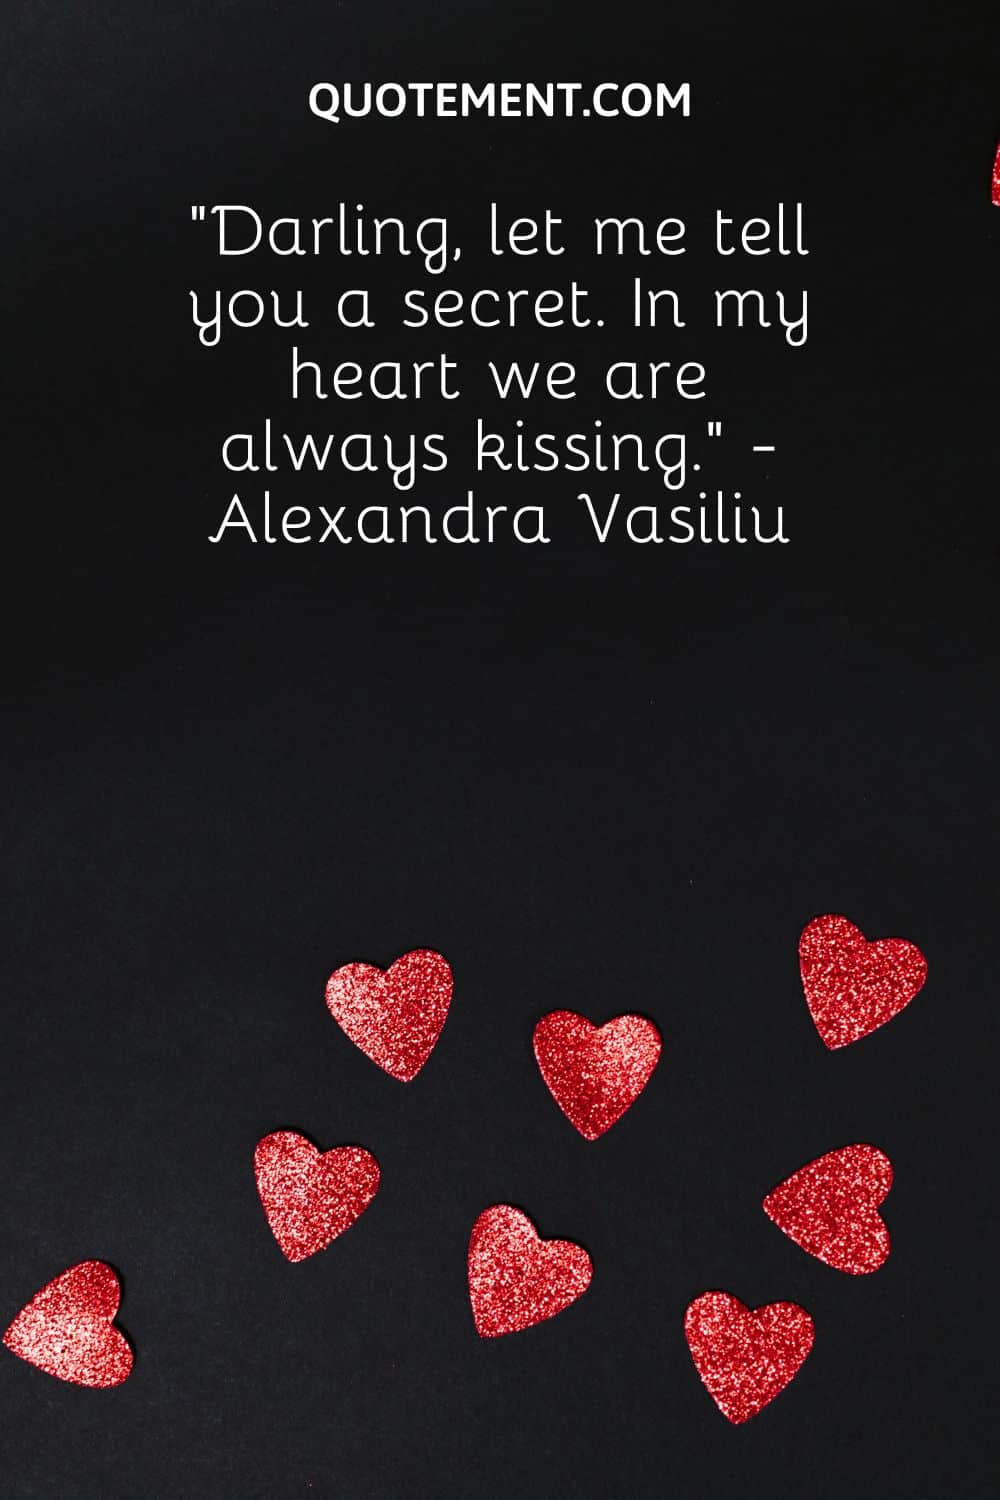 “Darling, let me tell you a secret. In my heart we are always kissing.” - Alexandra Vasiliu